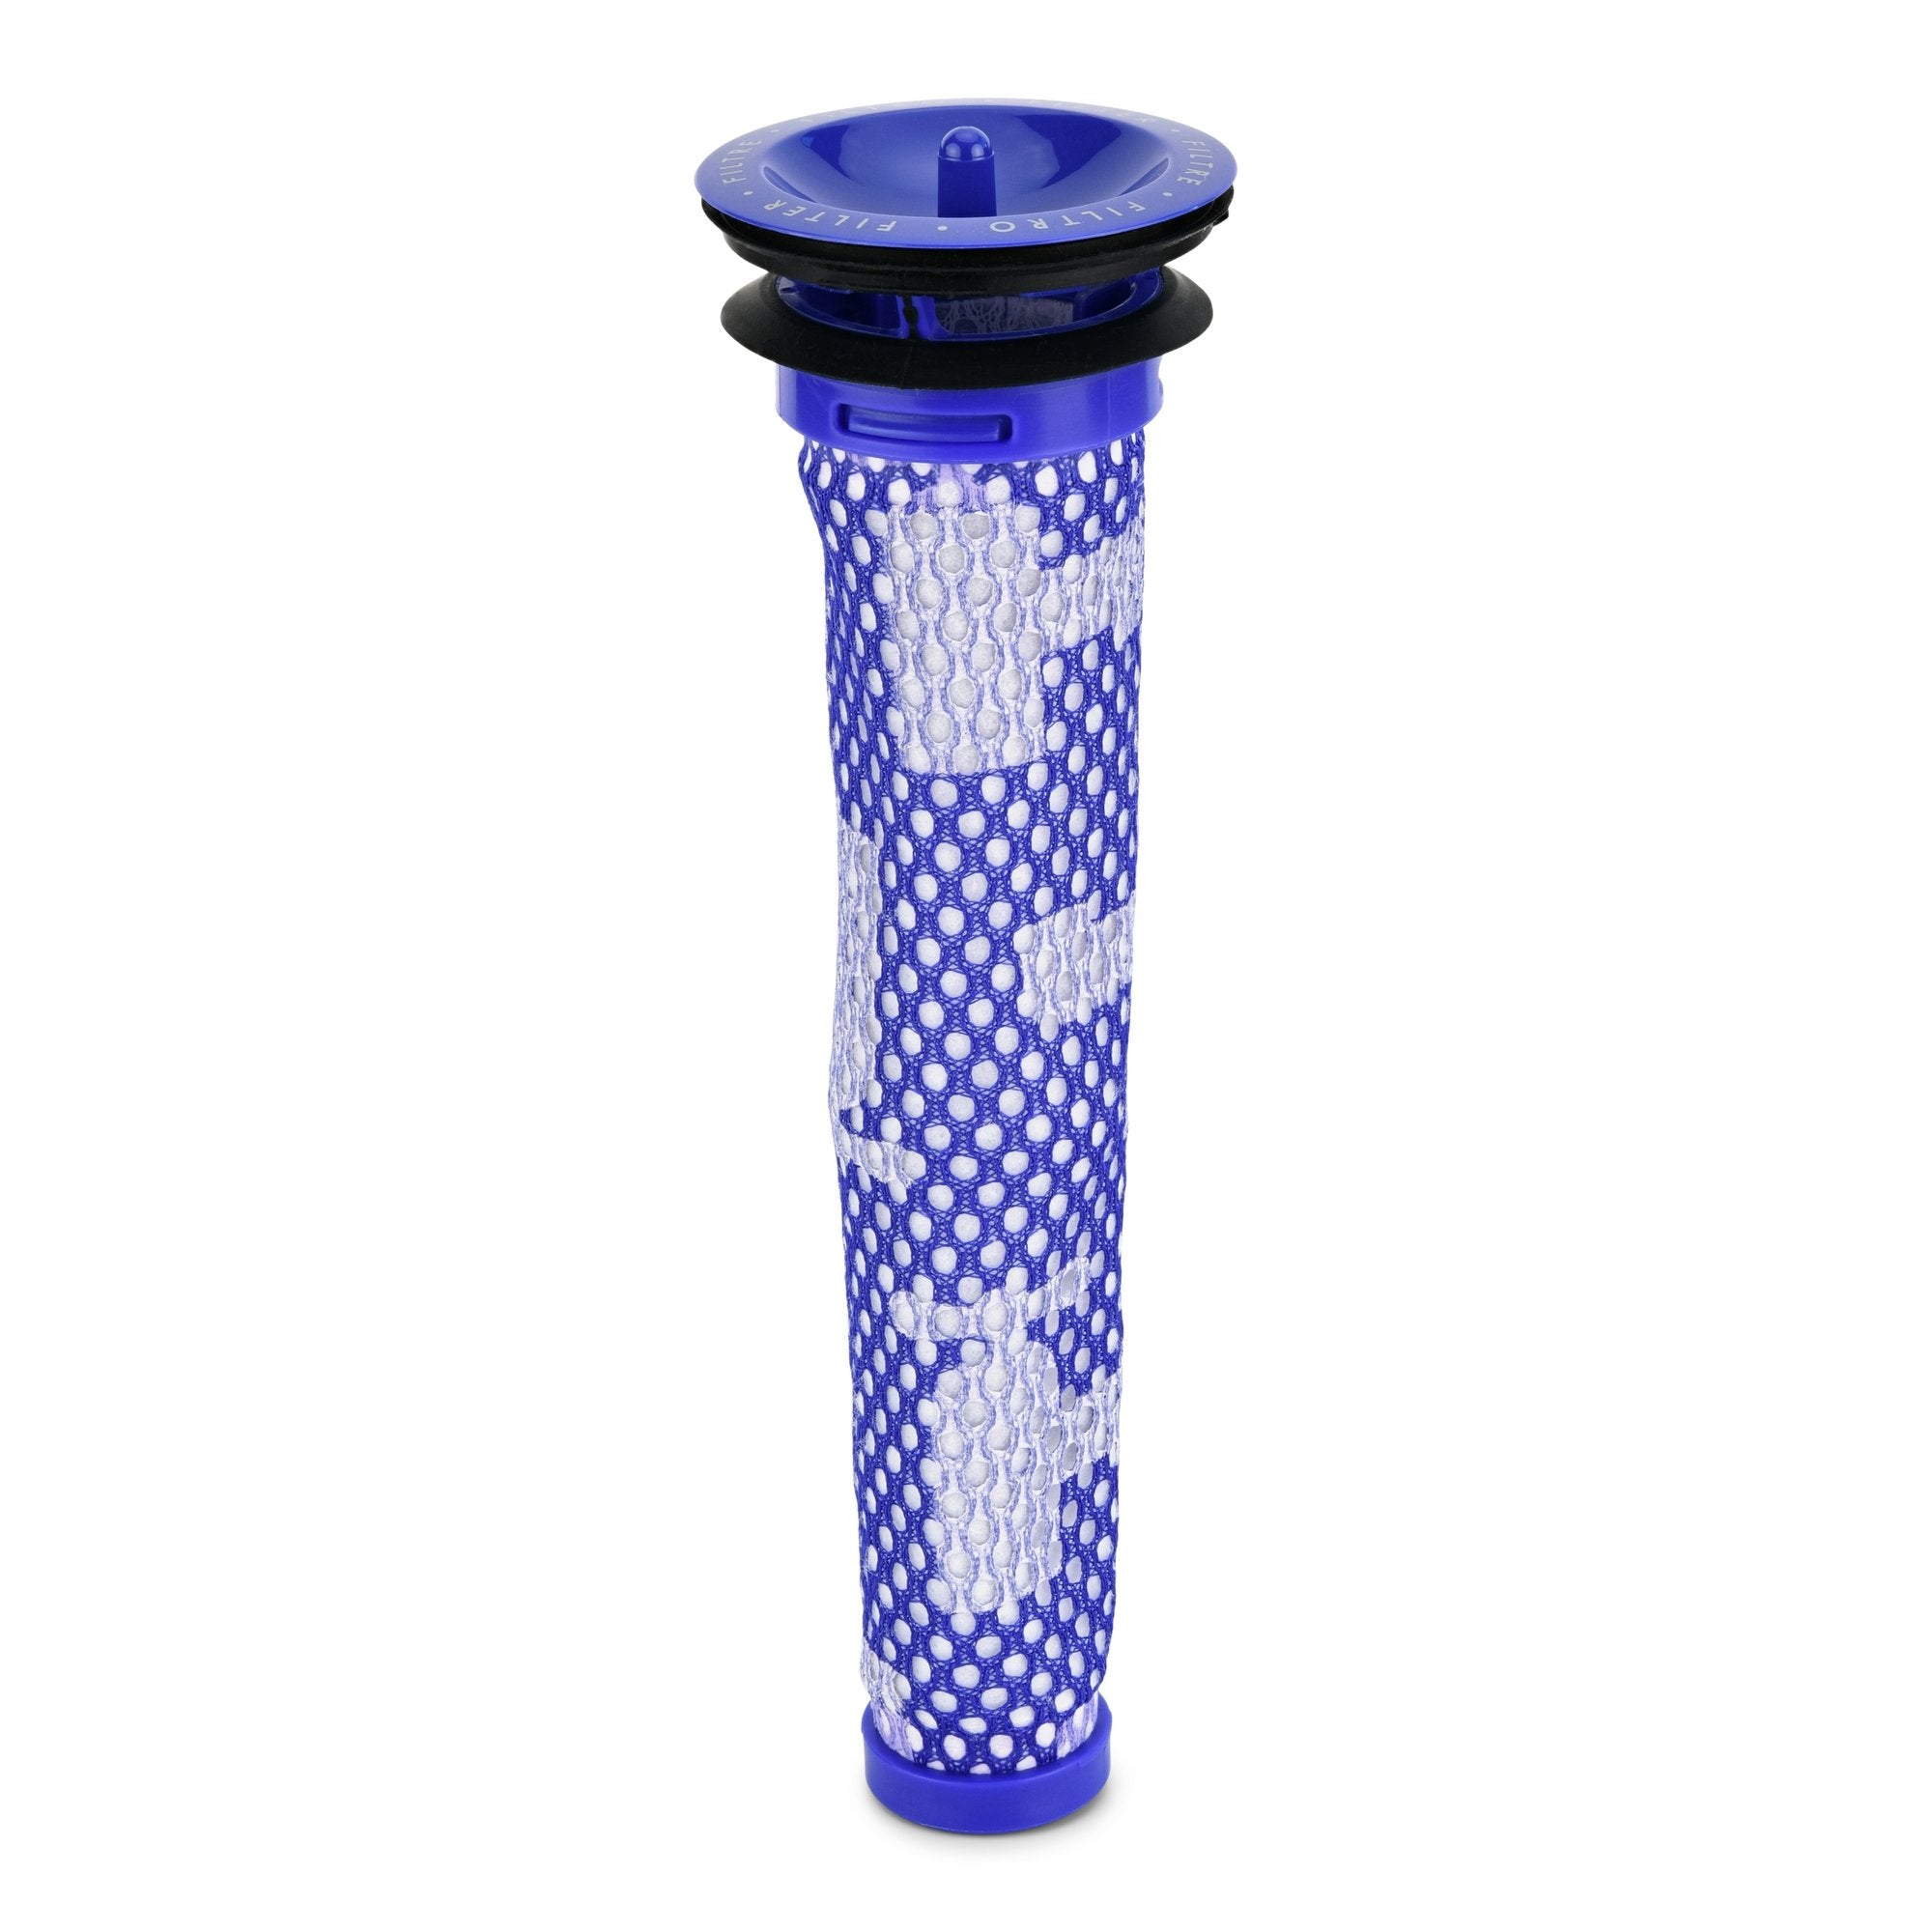 Dyson V8 Absolute HEPA and Pre-Filter Replacement - iFixit Repair Guide